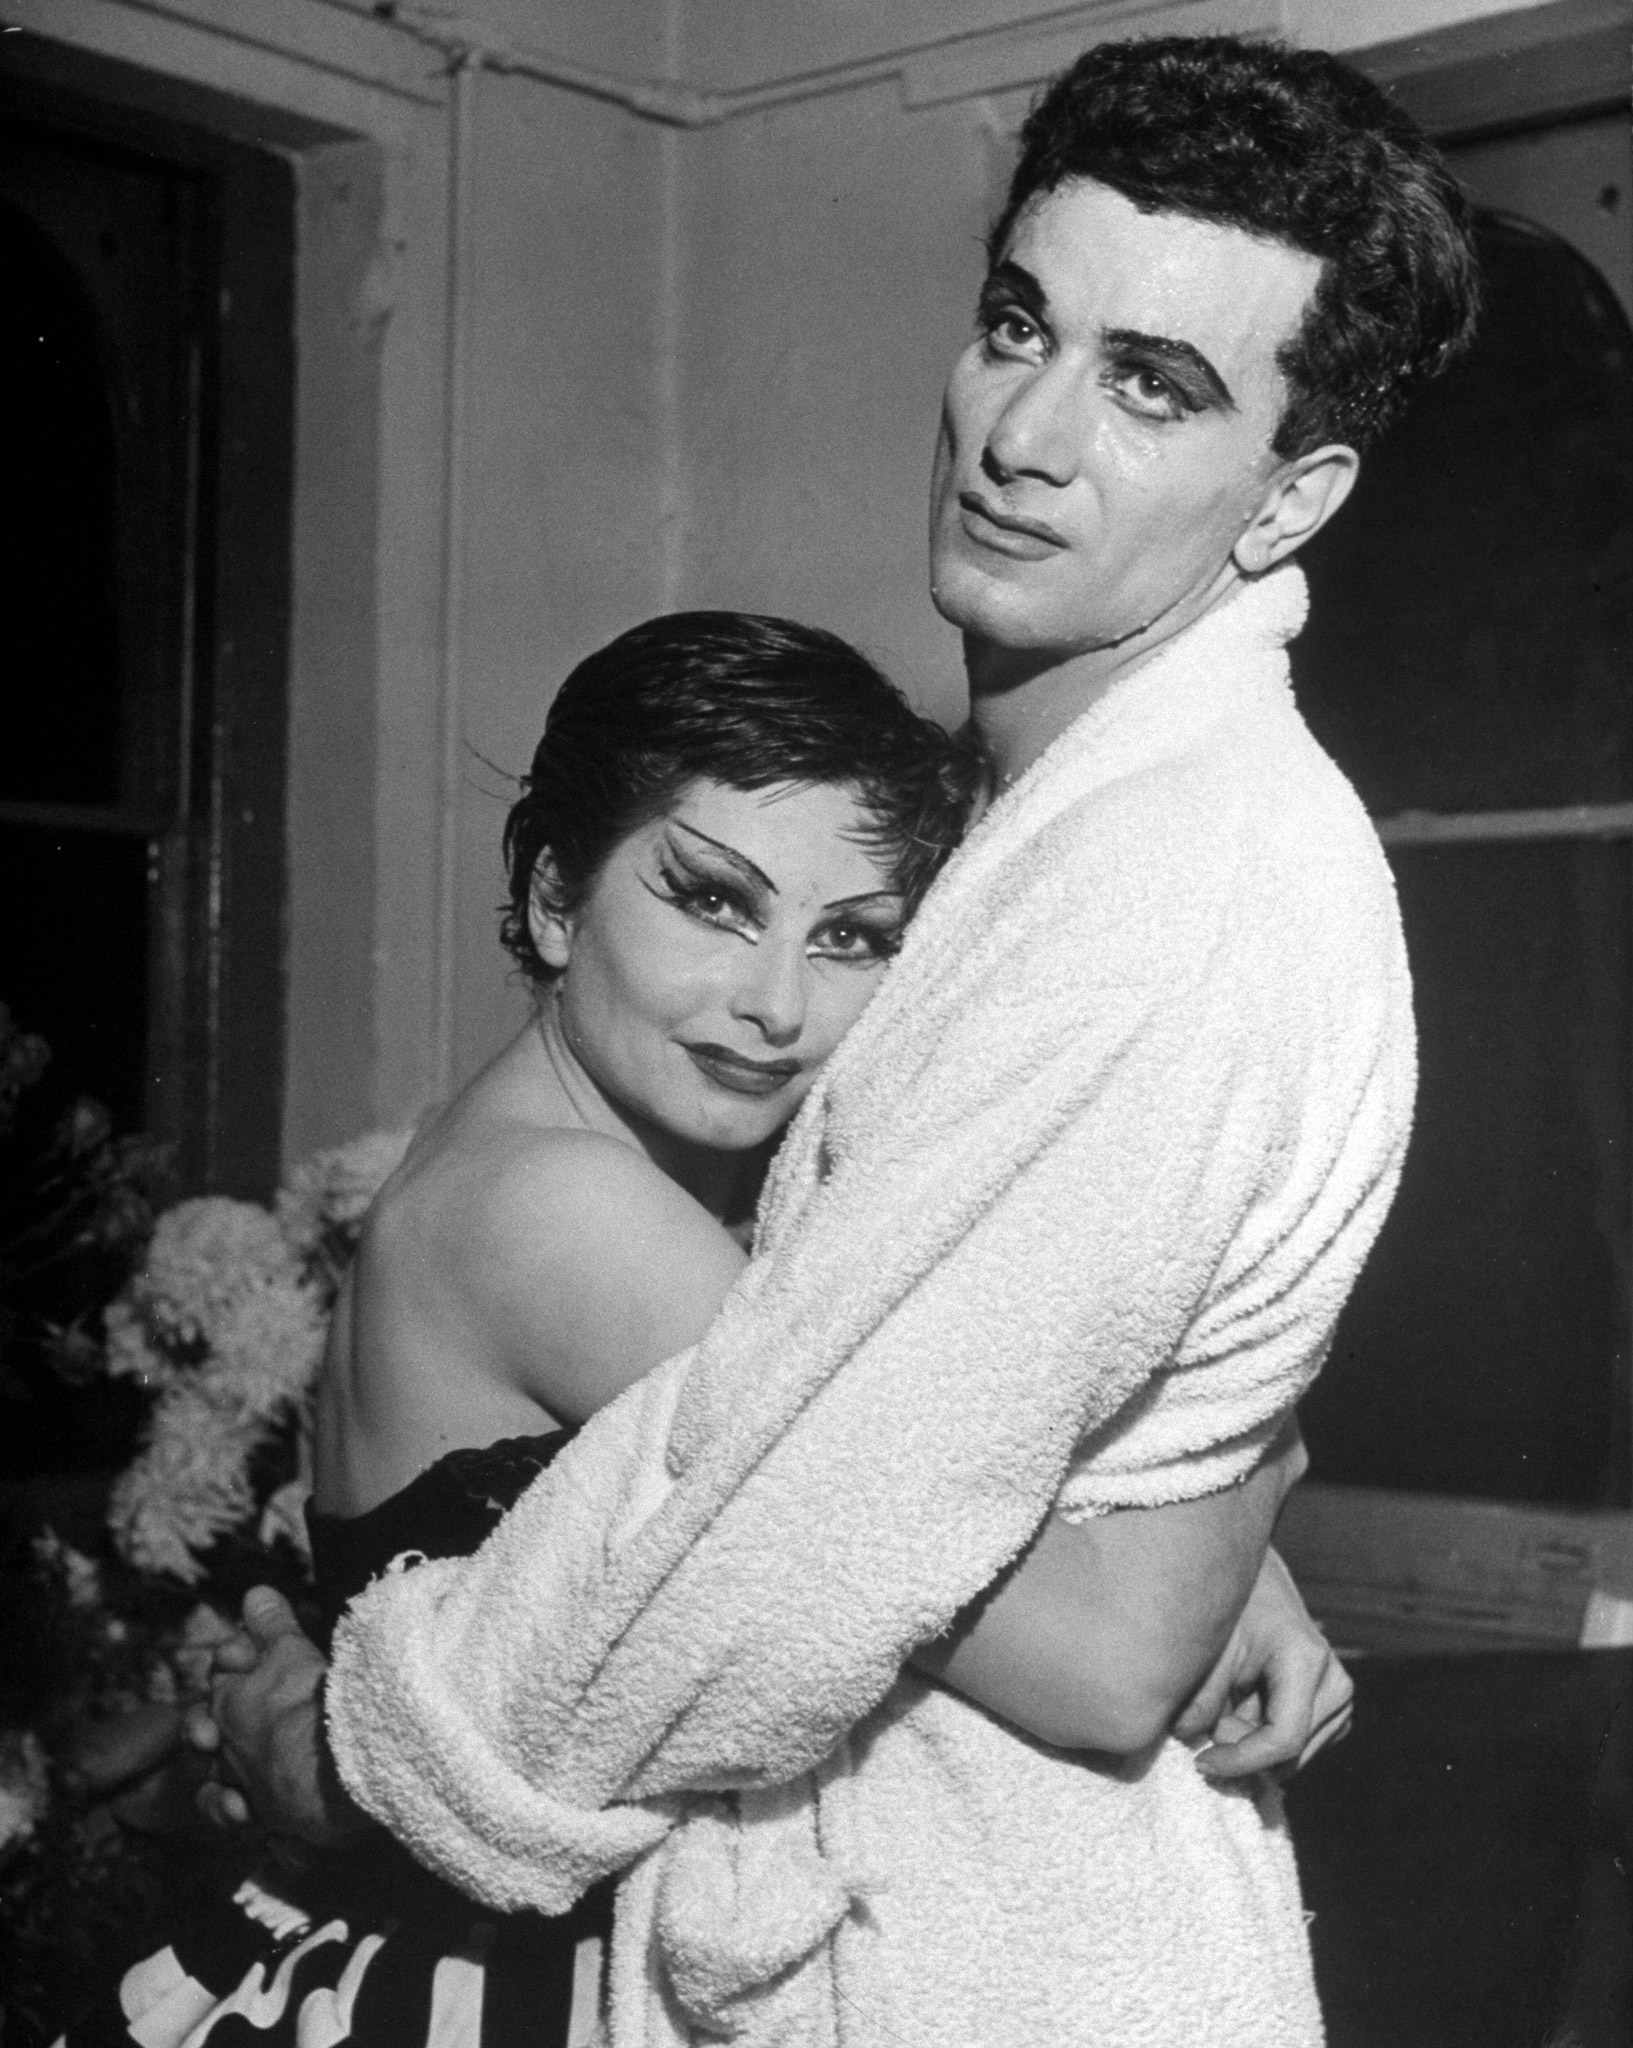 Dancers Roland Petit and Renee (Zizi) Jeanmaire hugging each other after performance in the ballet "Carmen," 1949.